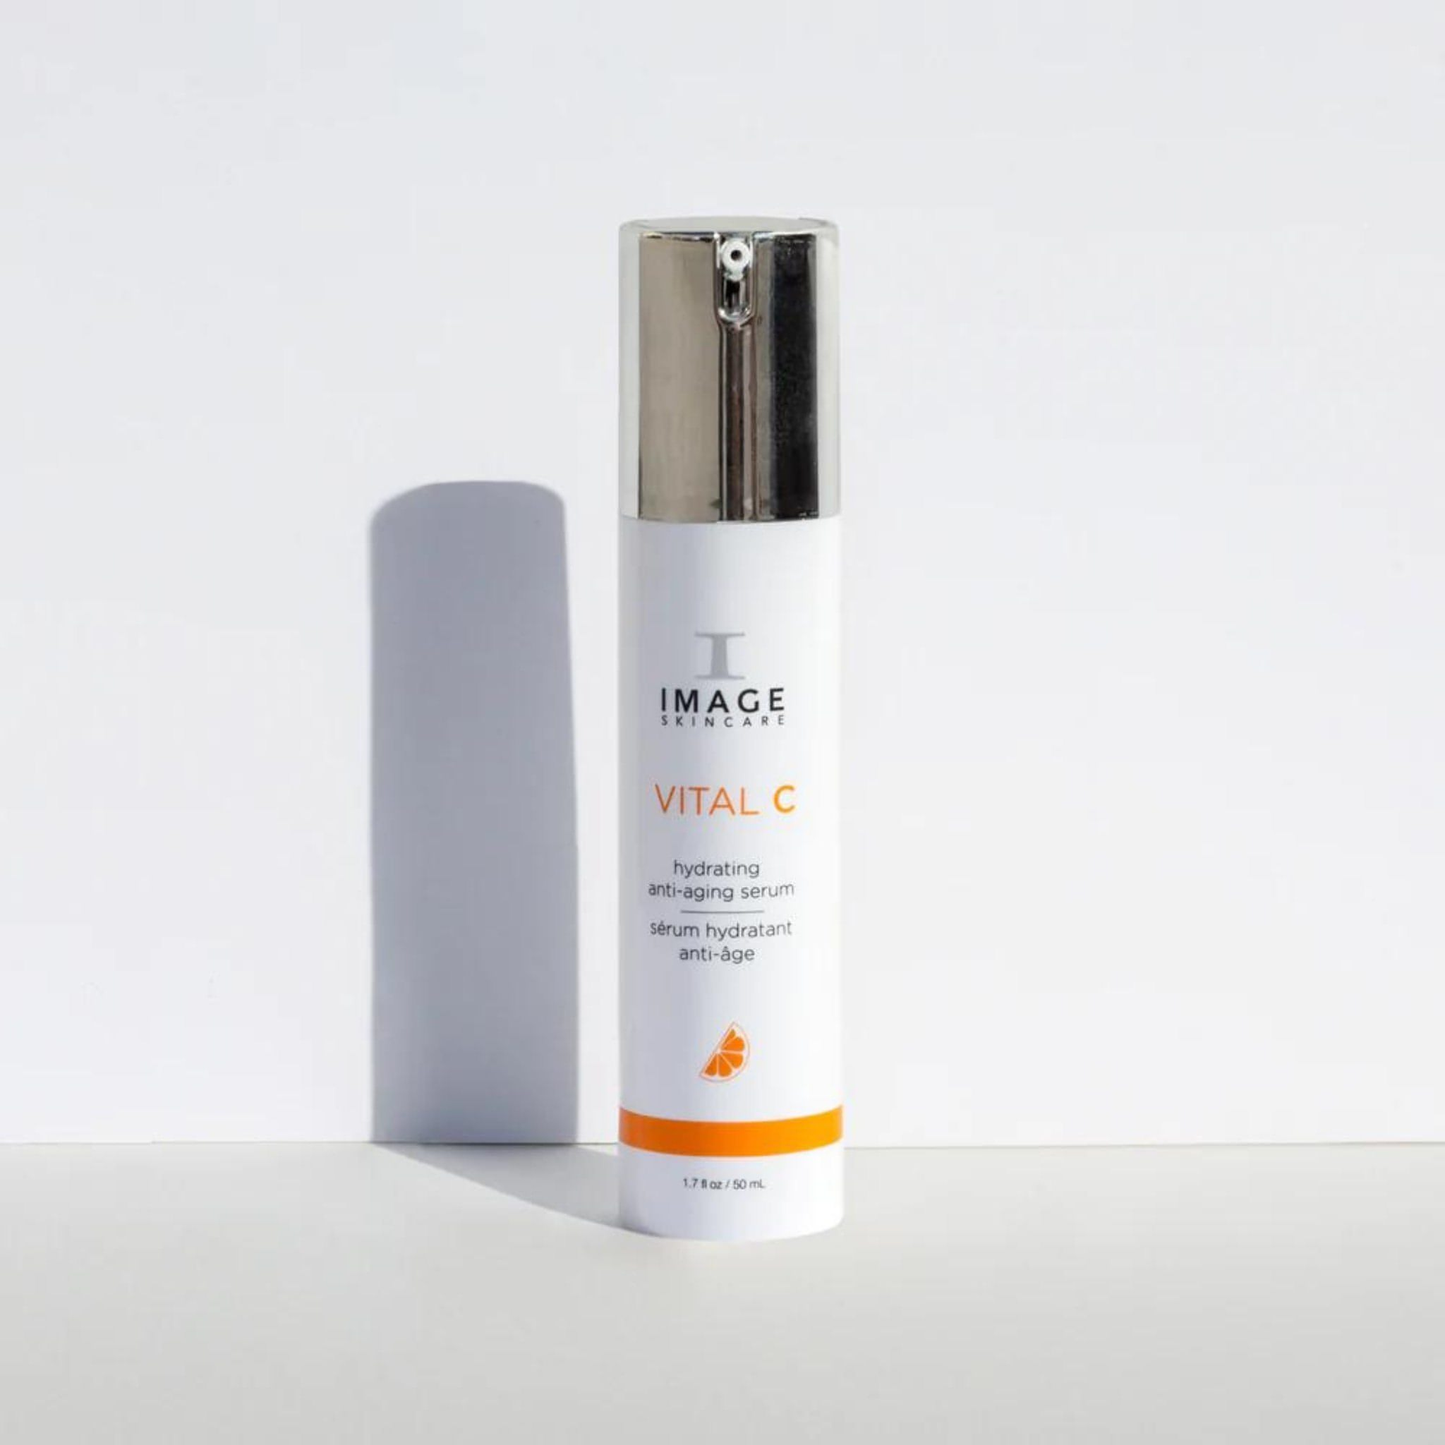 This high-potency serum softens the appearance of wrinkles, supports skin elasticity and fights environmental damage. Hyaluronic acid helps to lock in hydration and supports the look of plump, bouncy skin. It contains multiple forms of Vitamin C to help brighten the skin and fight visible signs of dullness and fatigue.